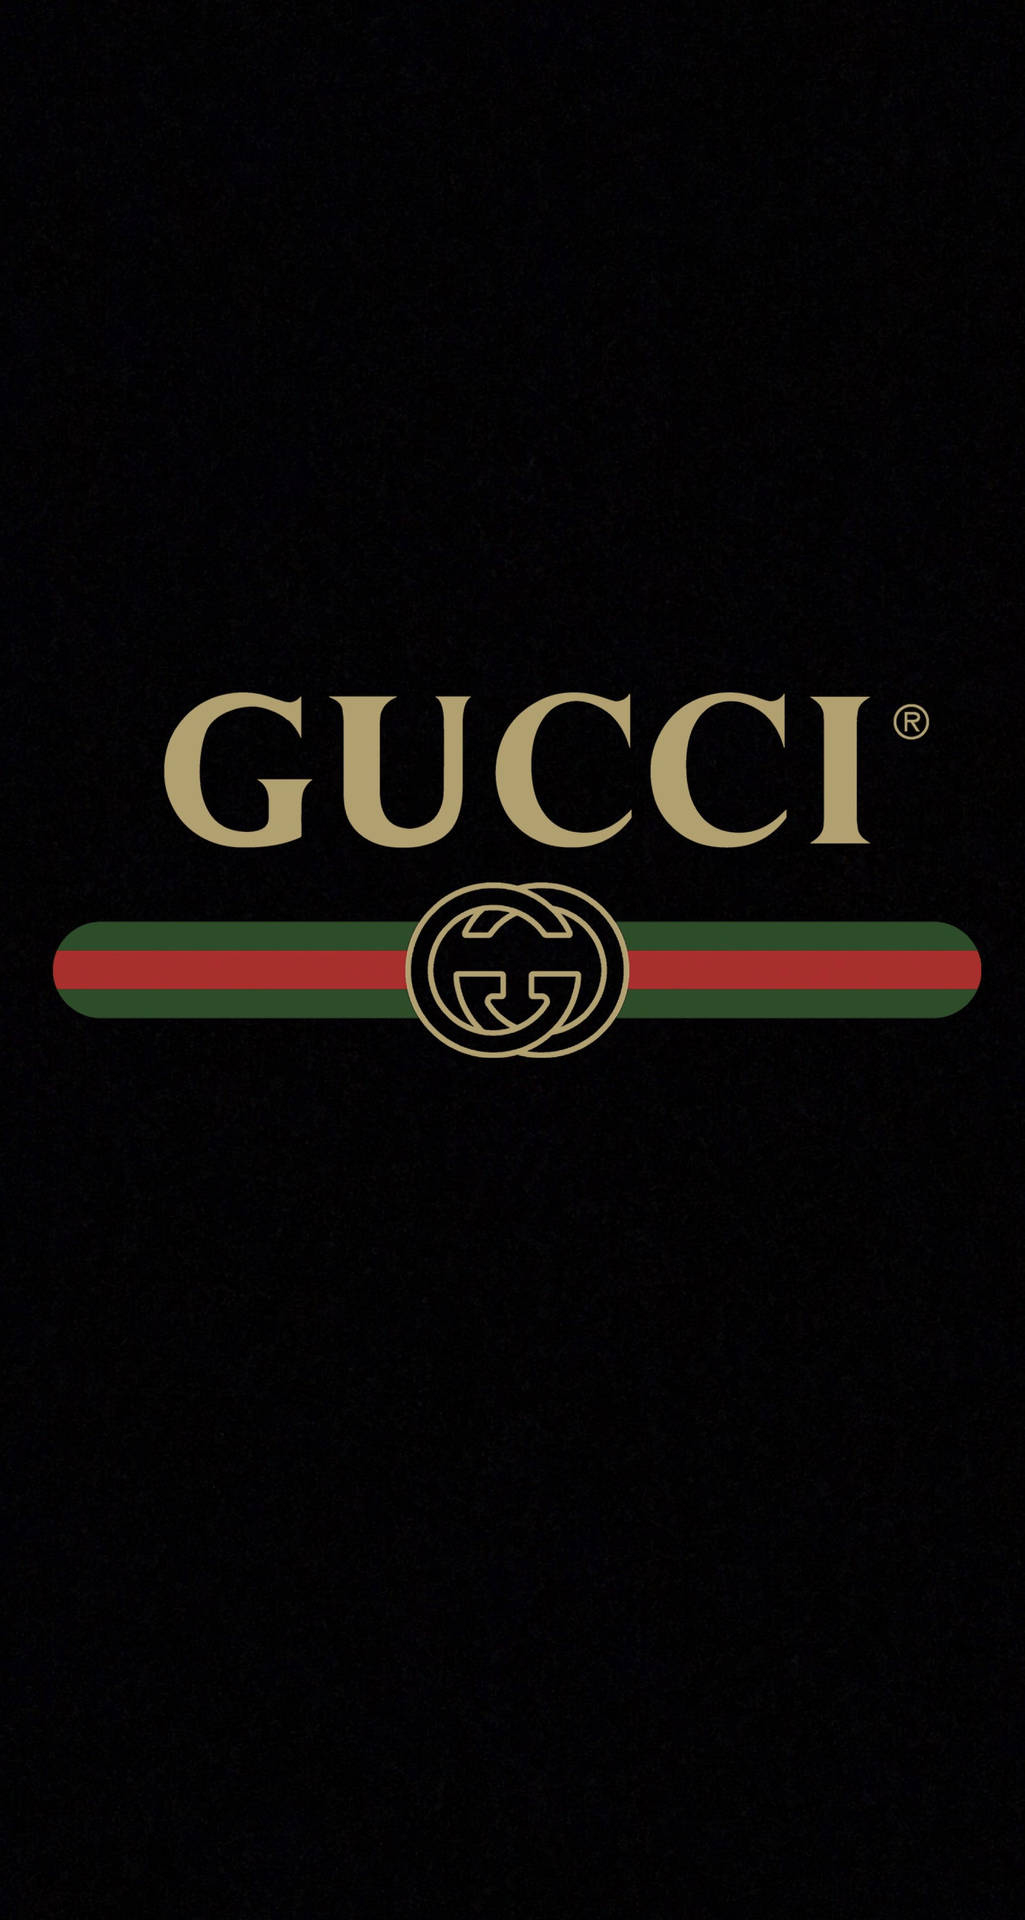 Gold And Black Gucci Iphone Background Wallpaper